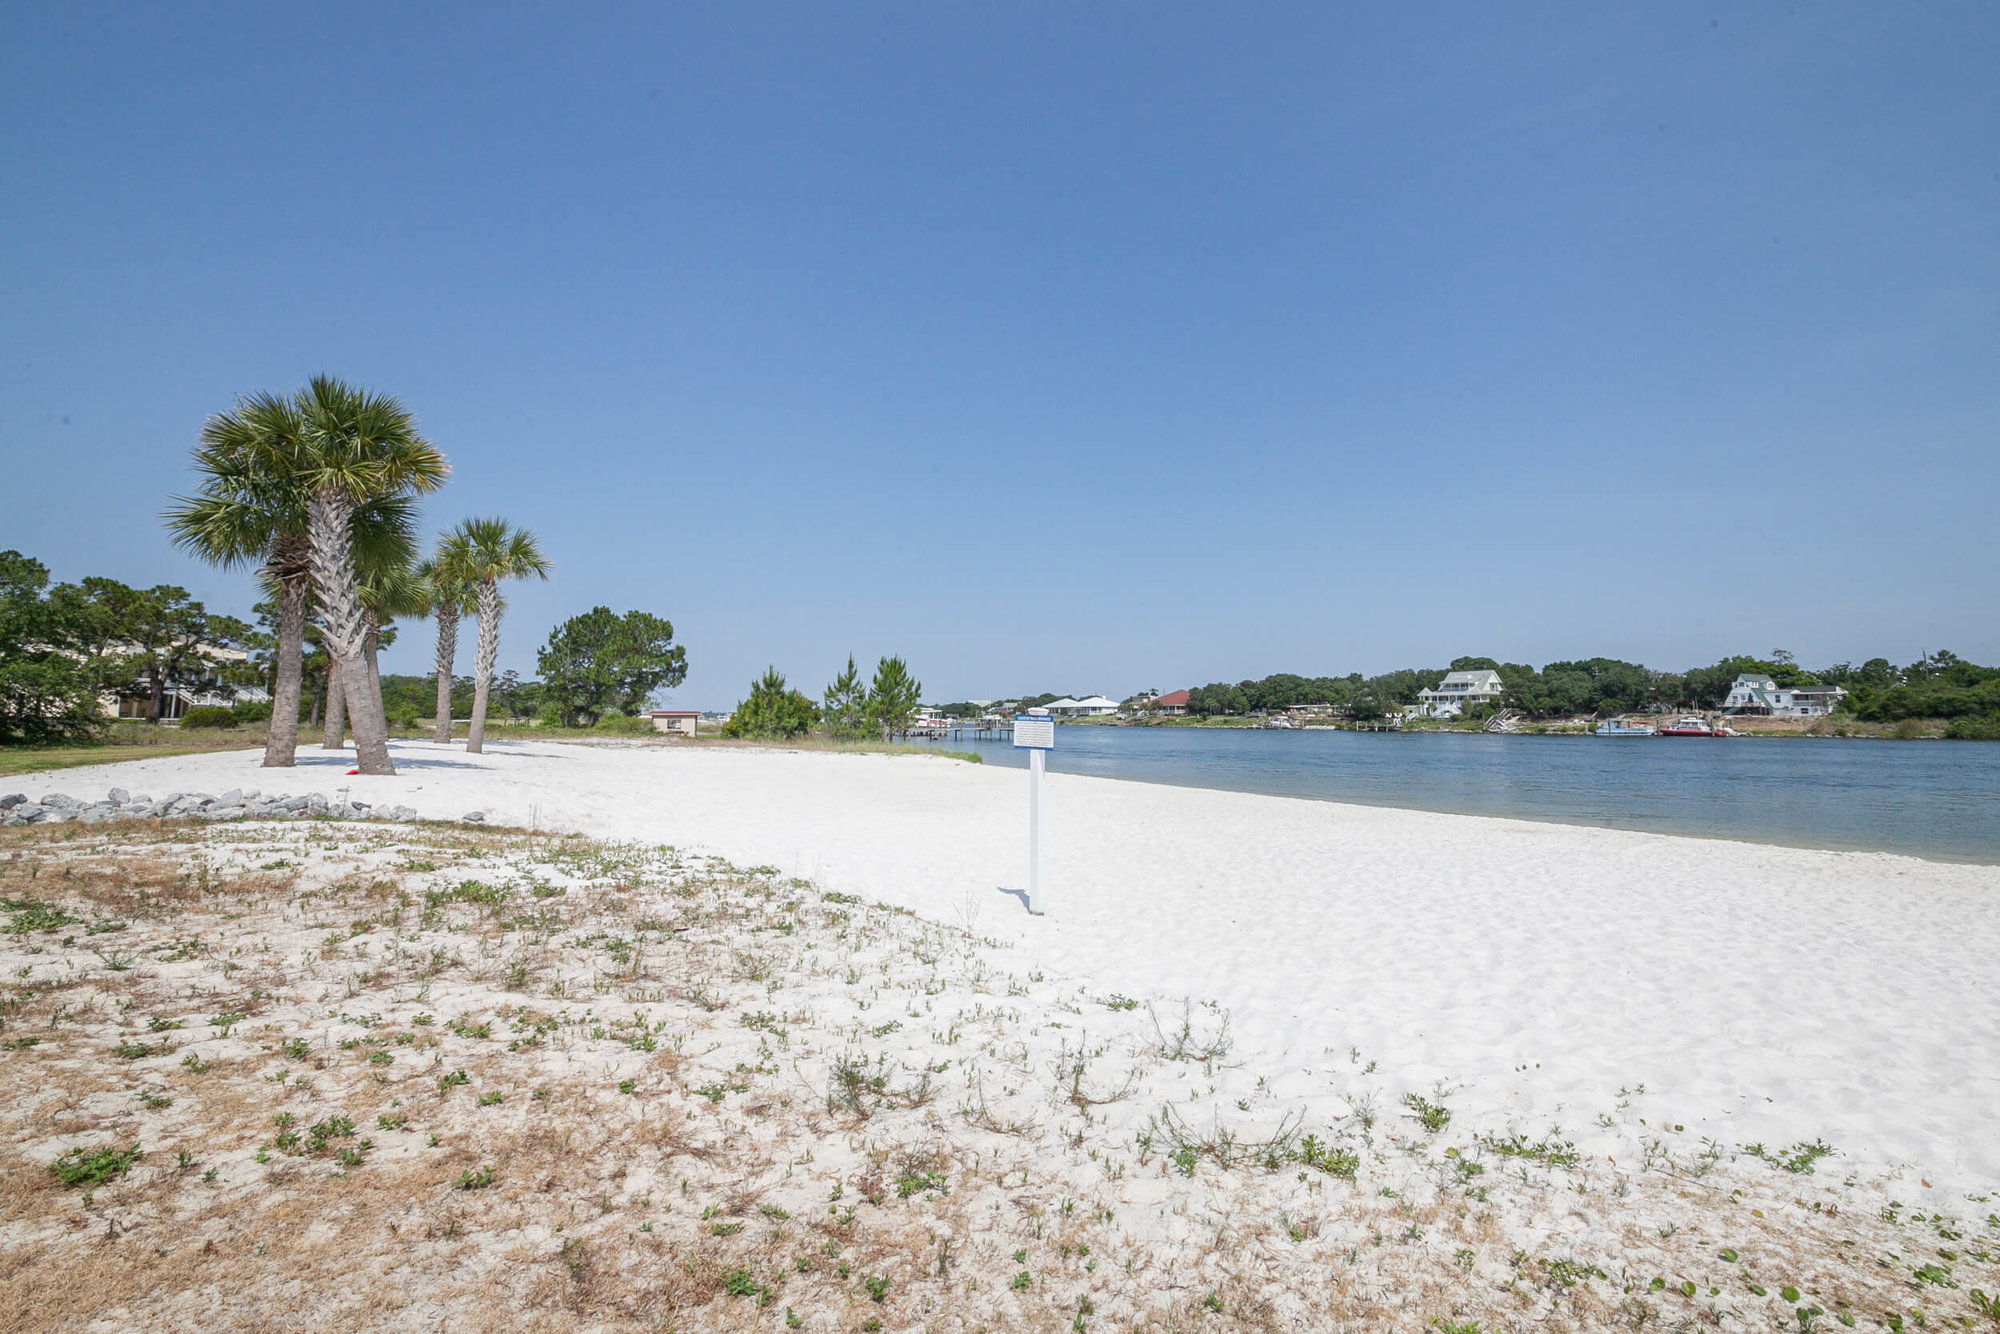 White sandy beach on the Intracoastal waterway at Sailmaker's Place condos in Perdido Key